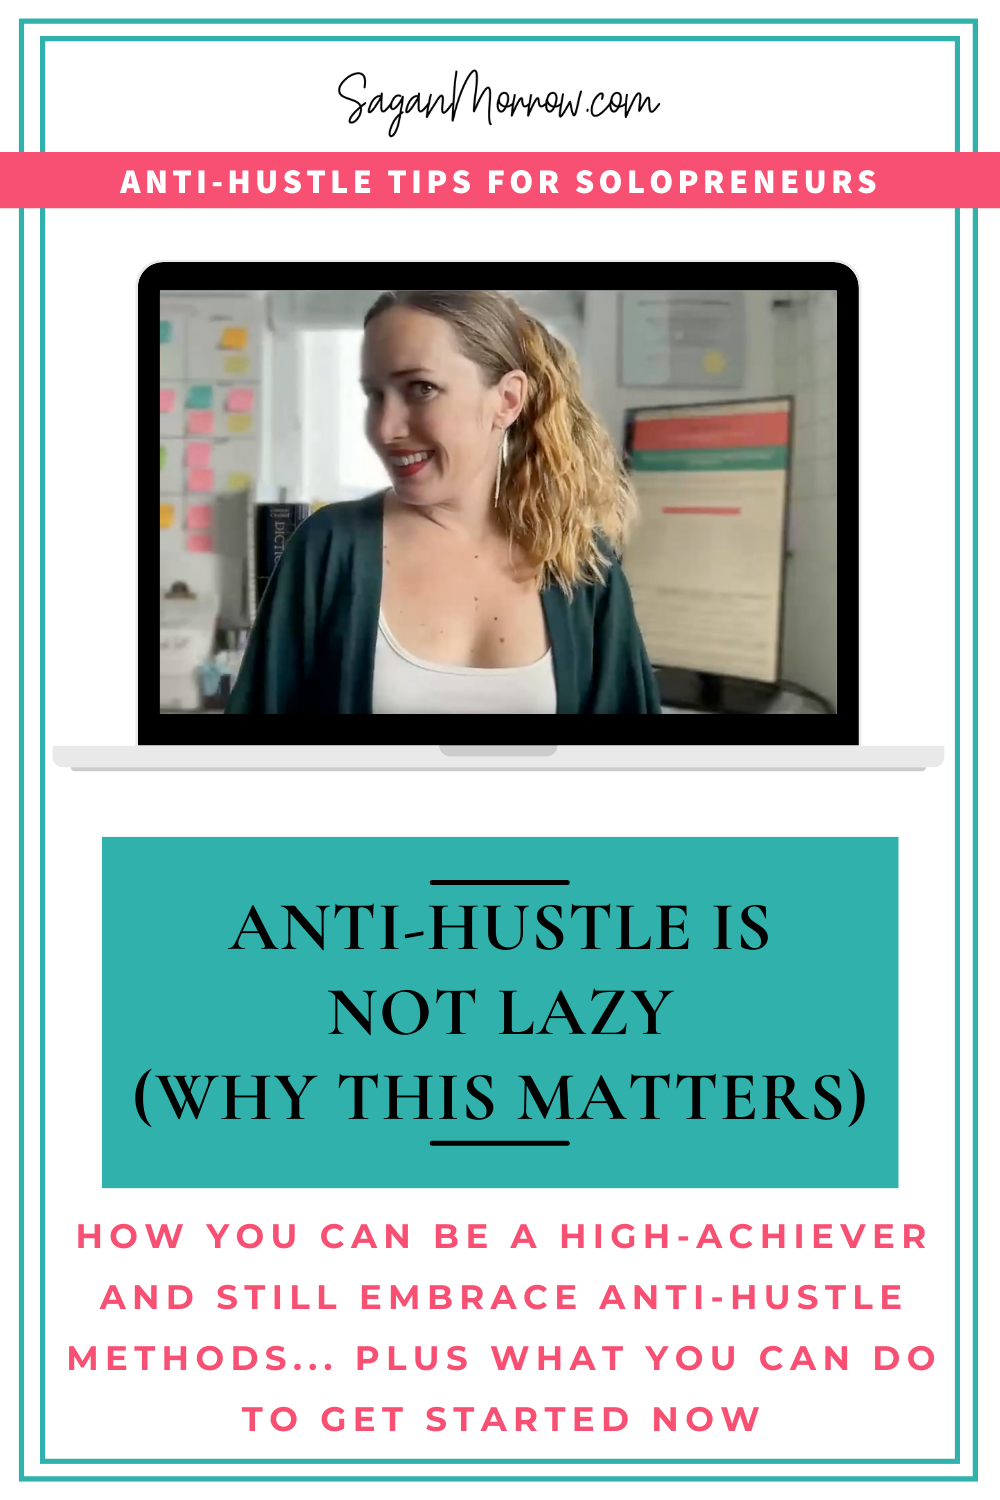 Anti hustle is NOT lazy — what you need to know about the anti hustle movement 